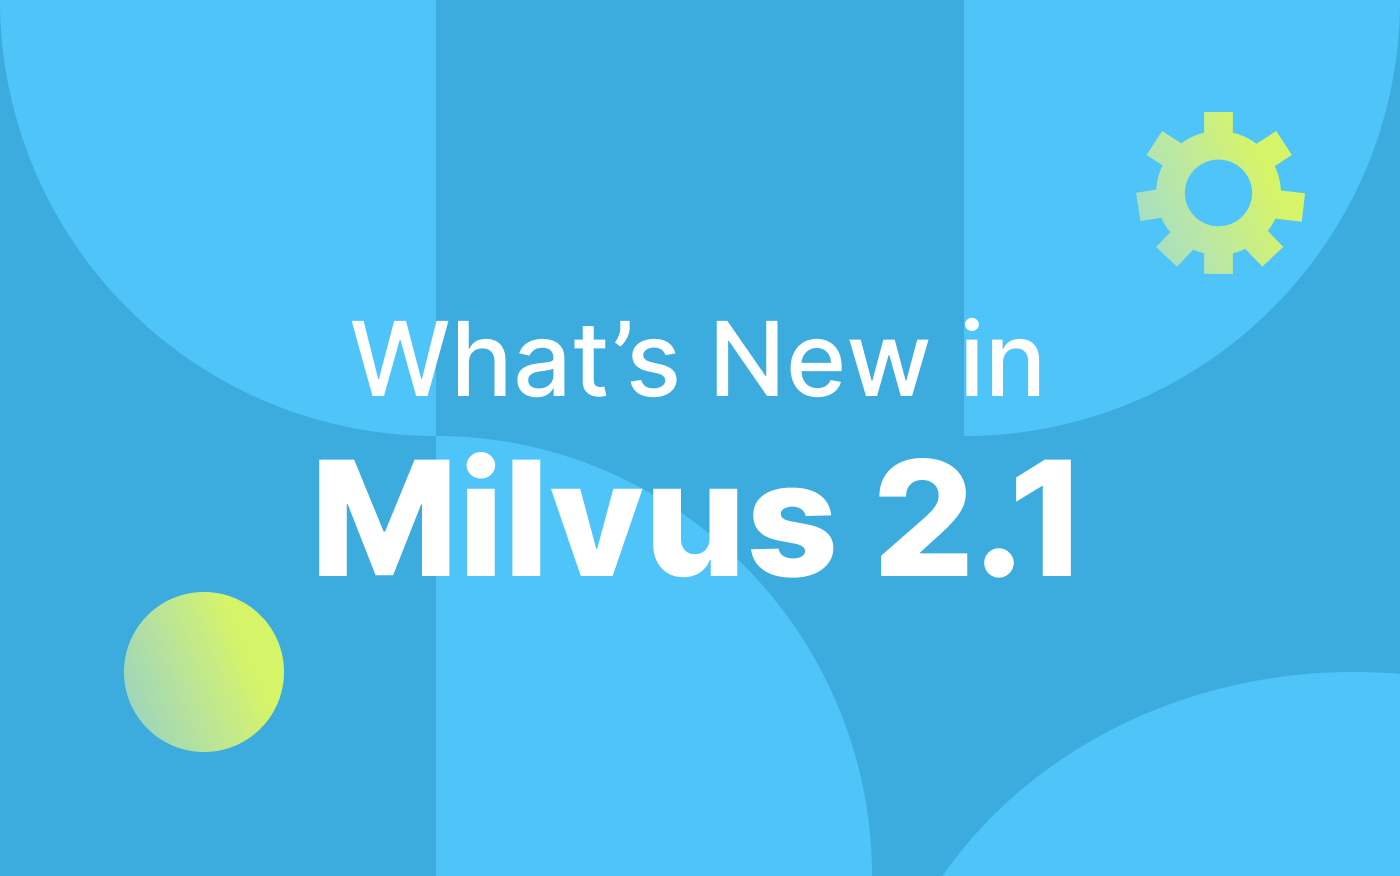 What's new in Milvus 2.1 - Towards simplicity and speed